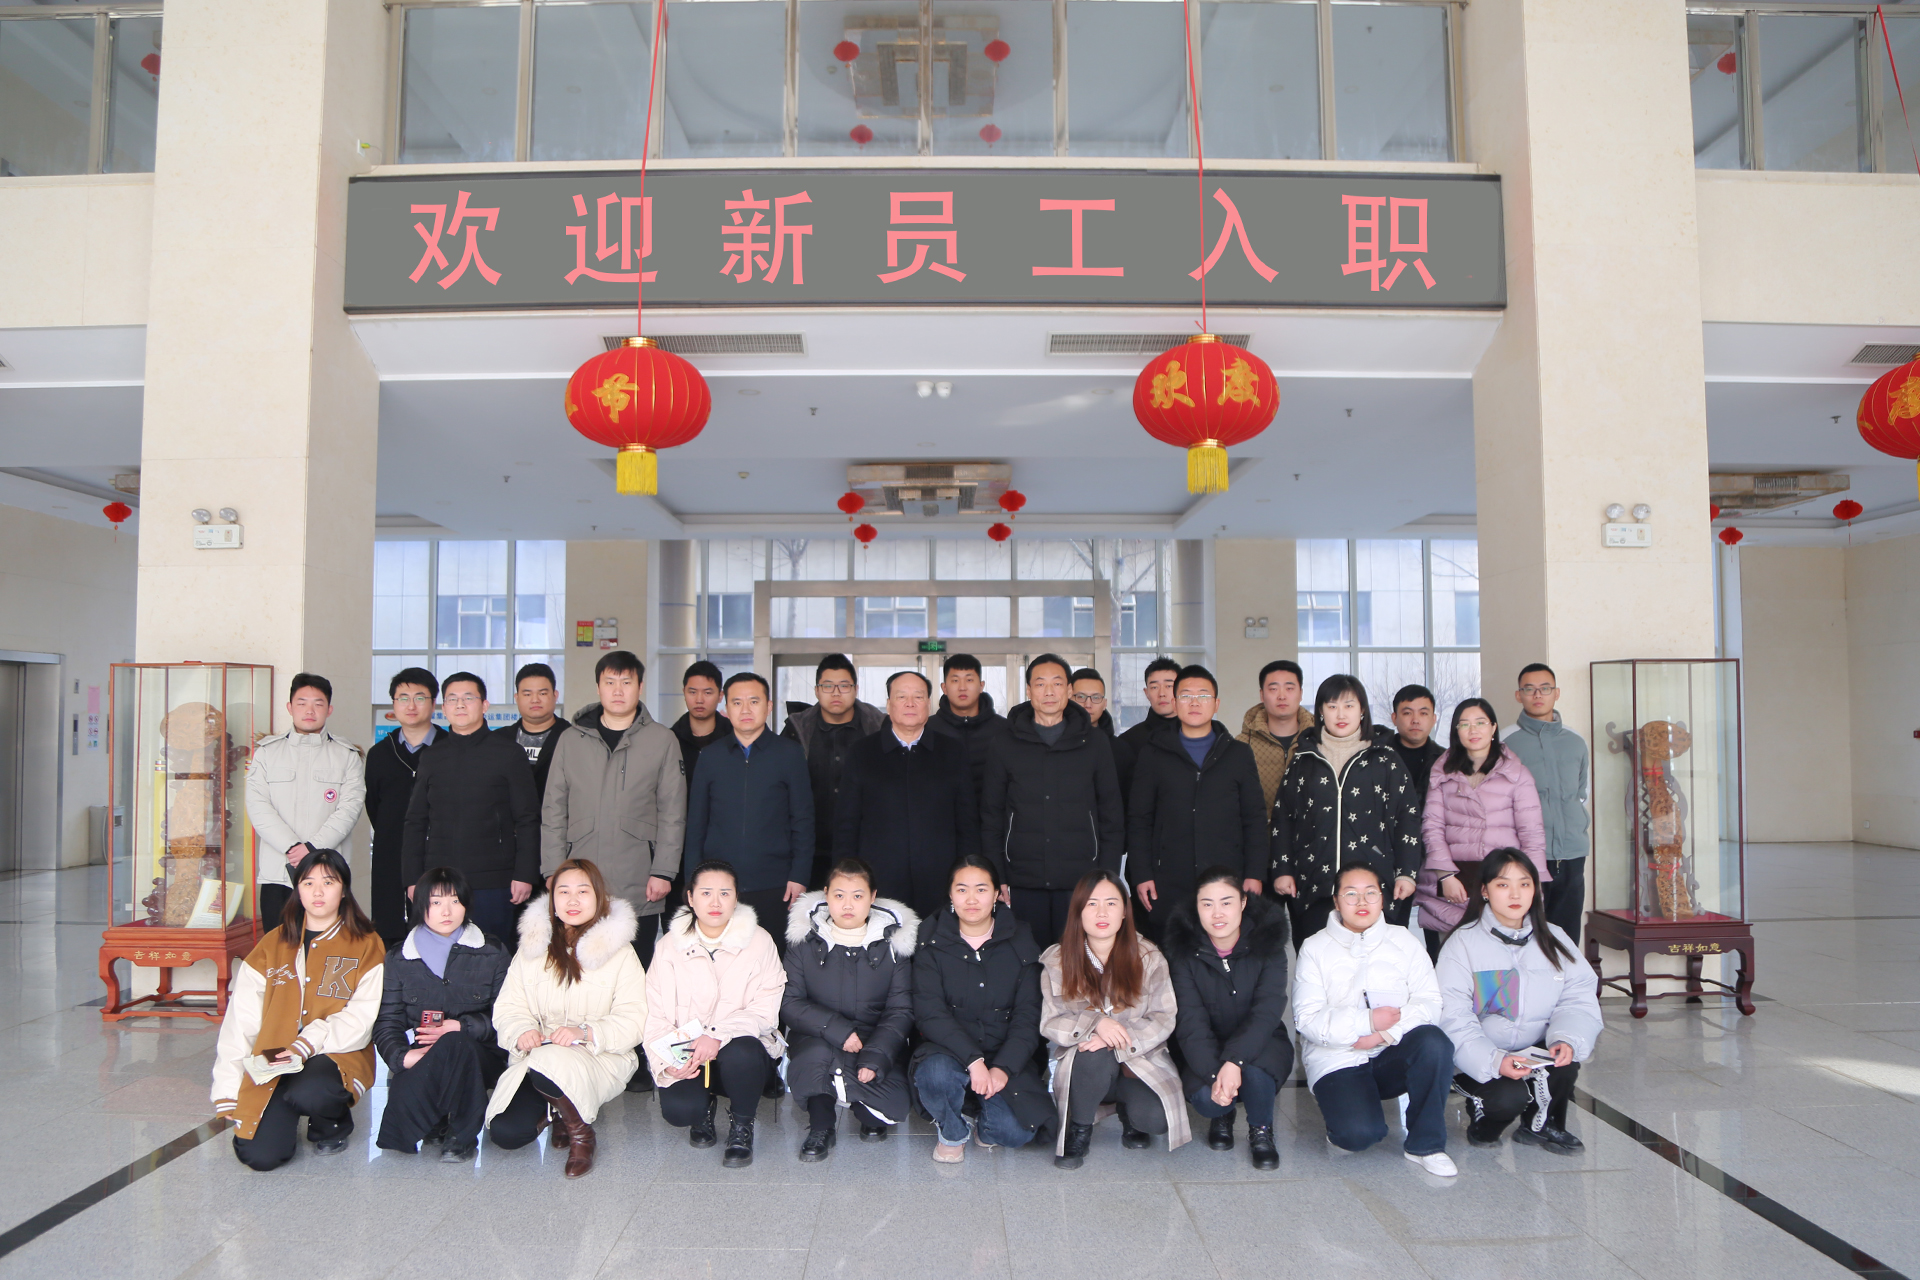 China Coal Group Held A Seminar For New Employees